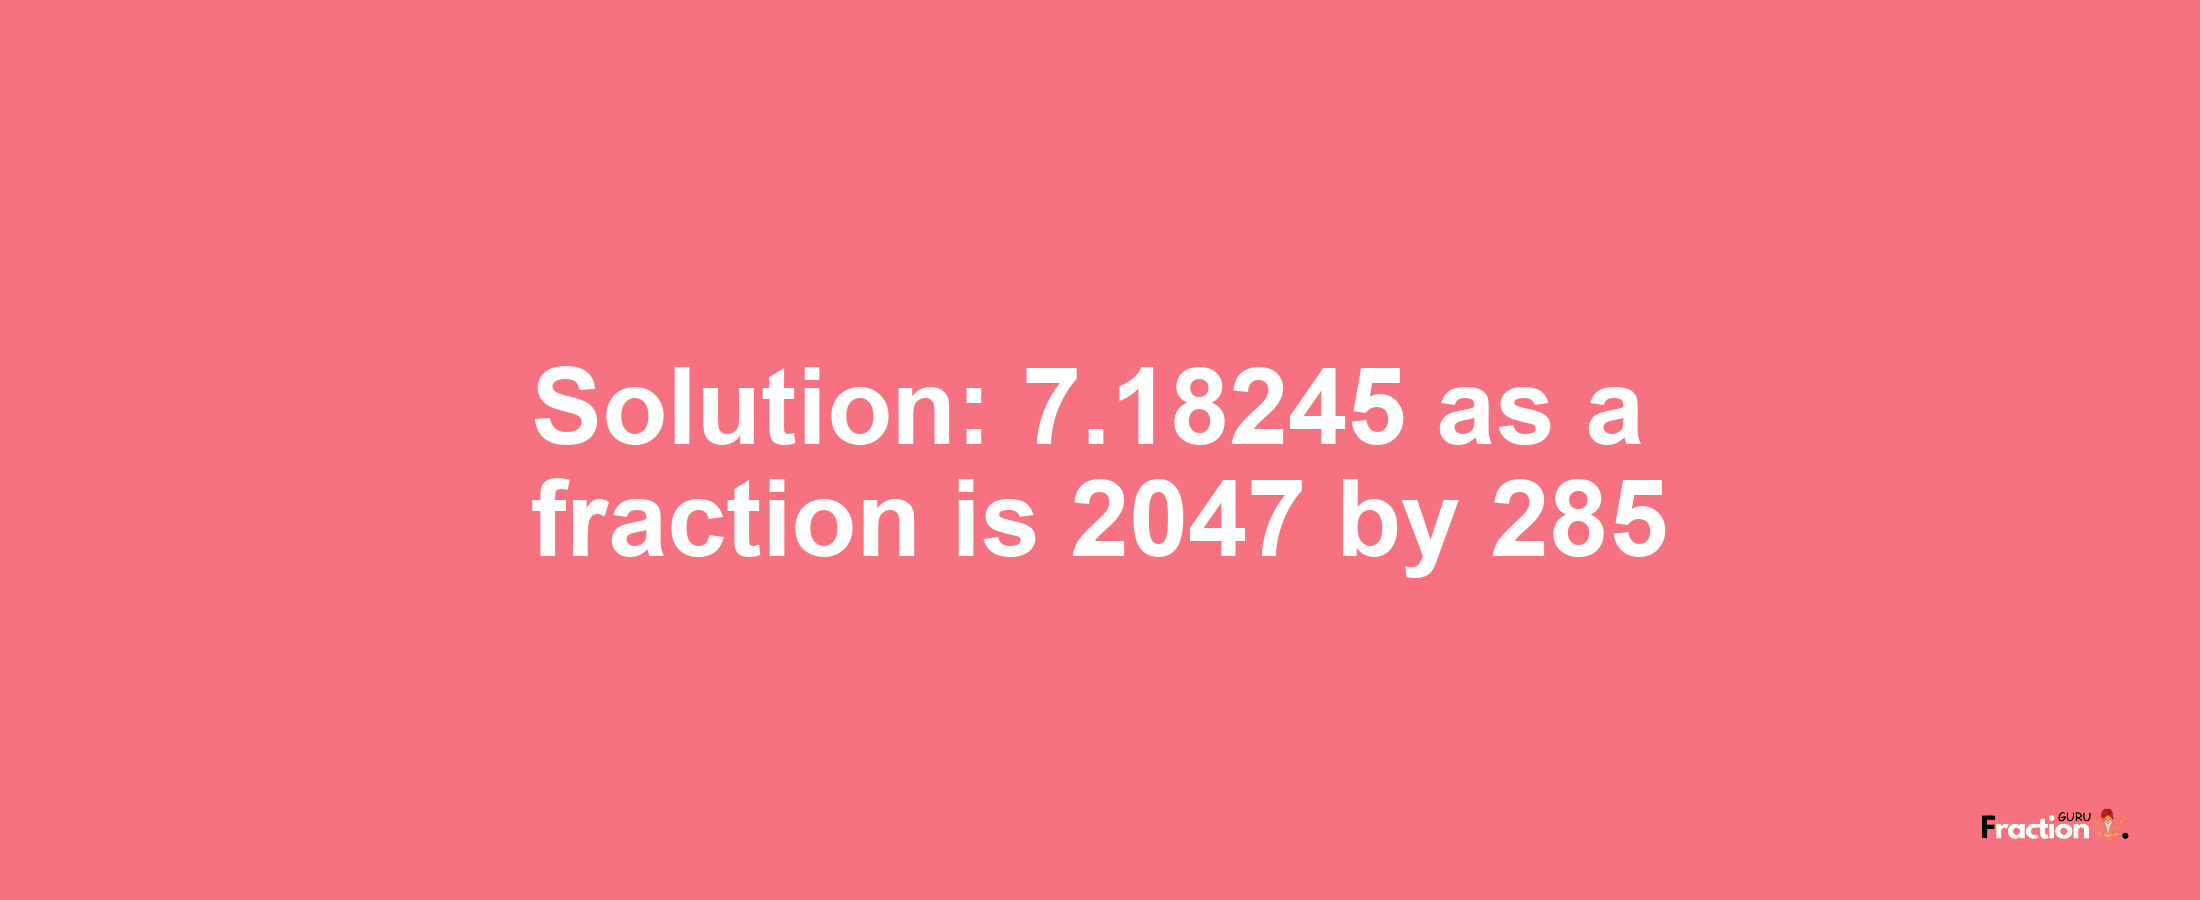 Solution:7.18245 as a fraction is 2047/285